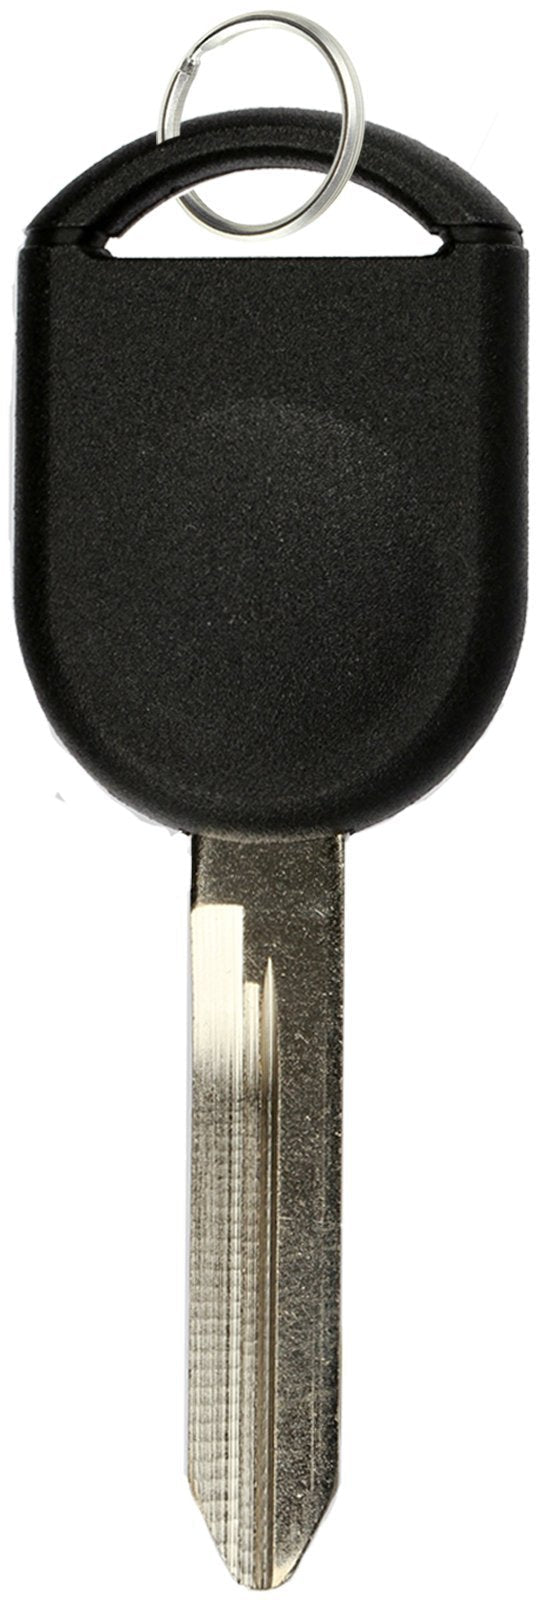  [AUSTRALIA] - KeylessOption Key Replacement Ignition Chipped Transponder For Ford Lincoln Mercury H92 H84 H85 Black